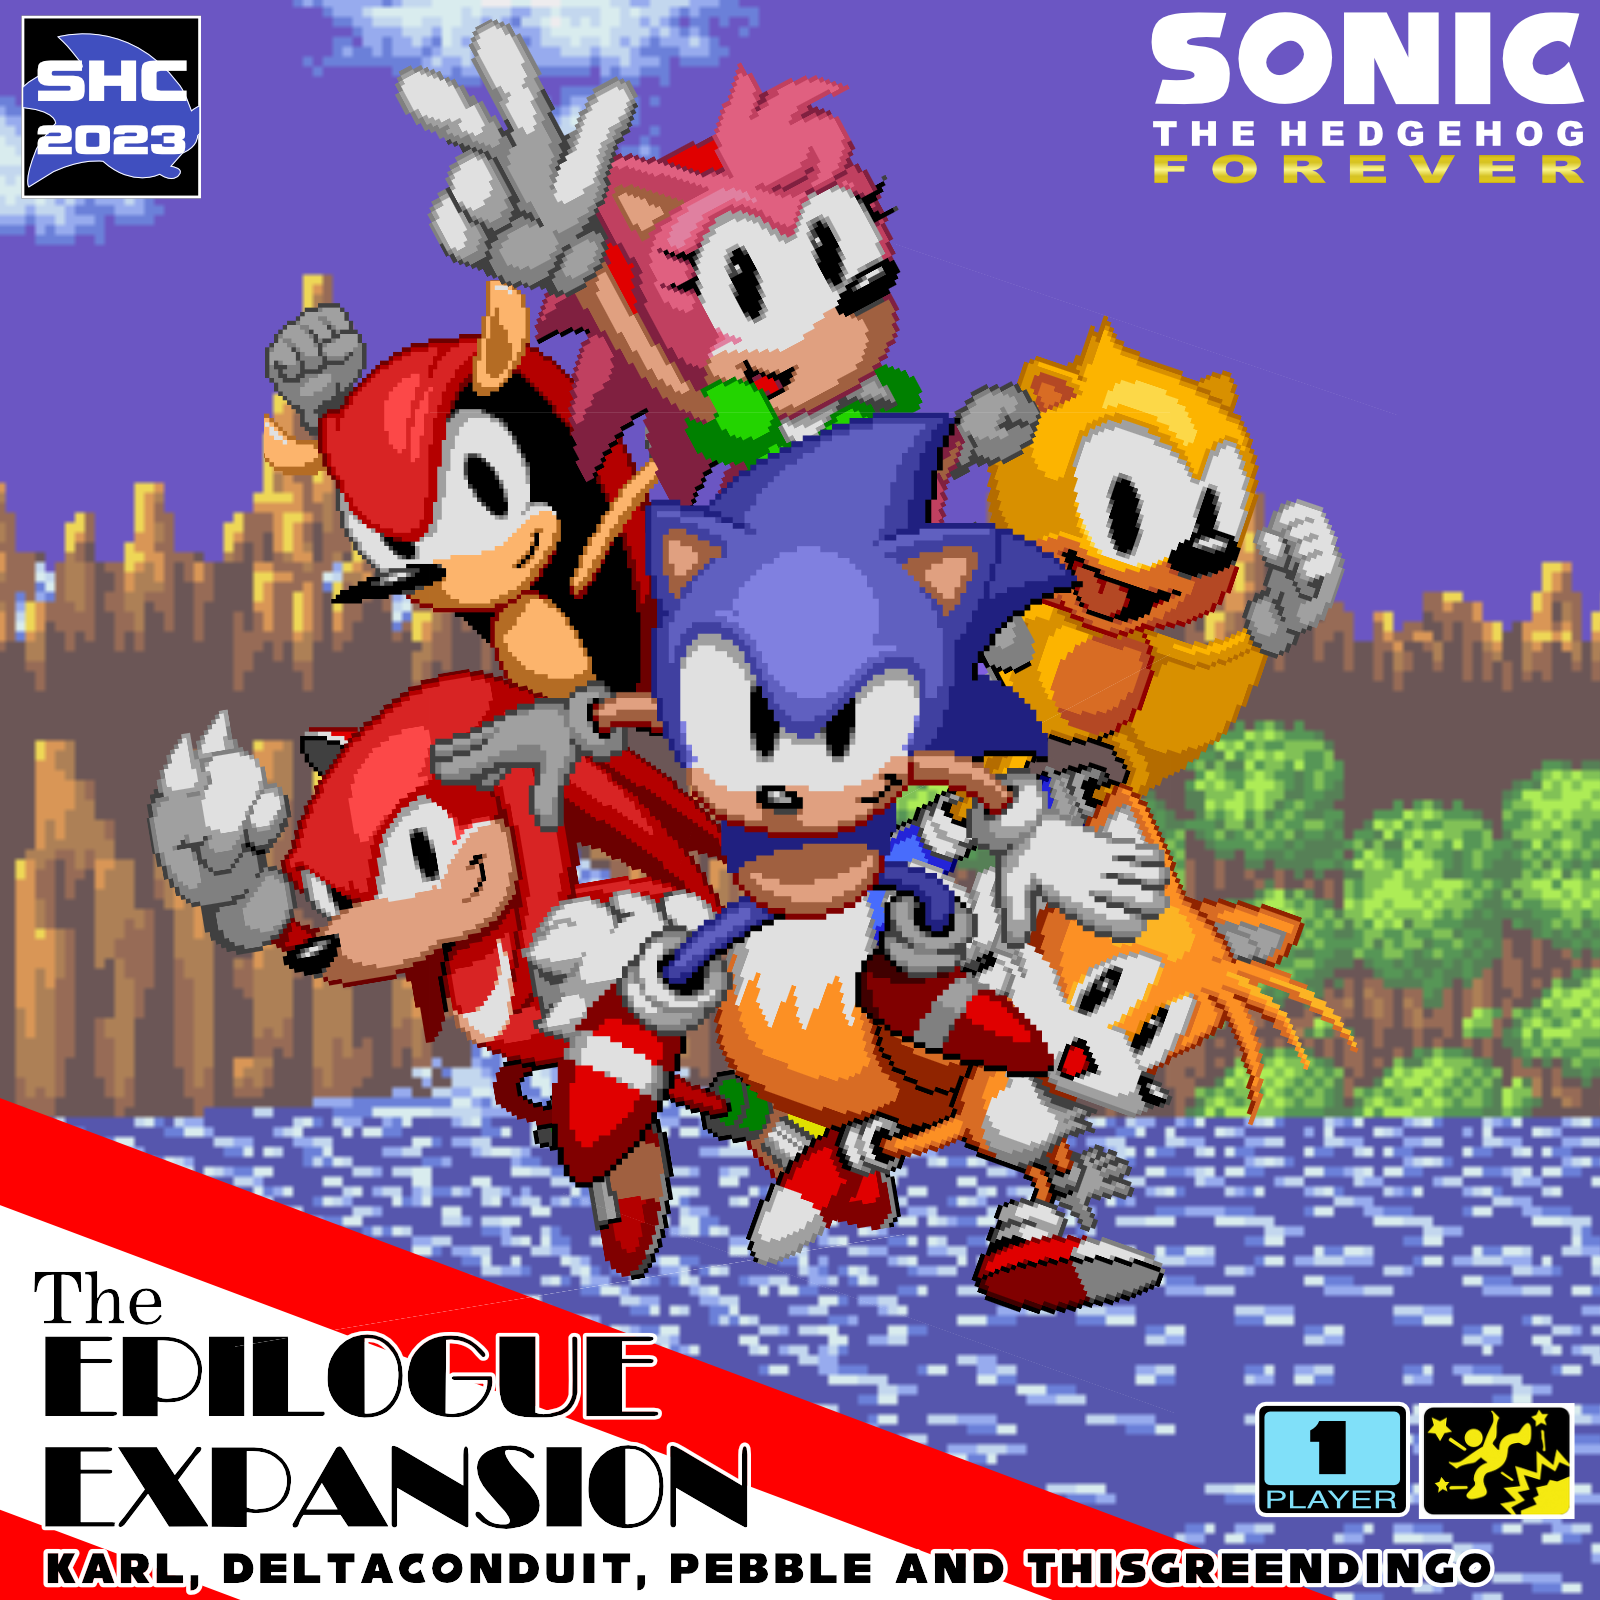 Sonic 3 and Knuckles ROM: Is It Safe and Is It Legal To Download This ROM  In Your Area? 